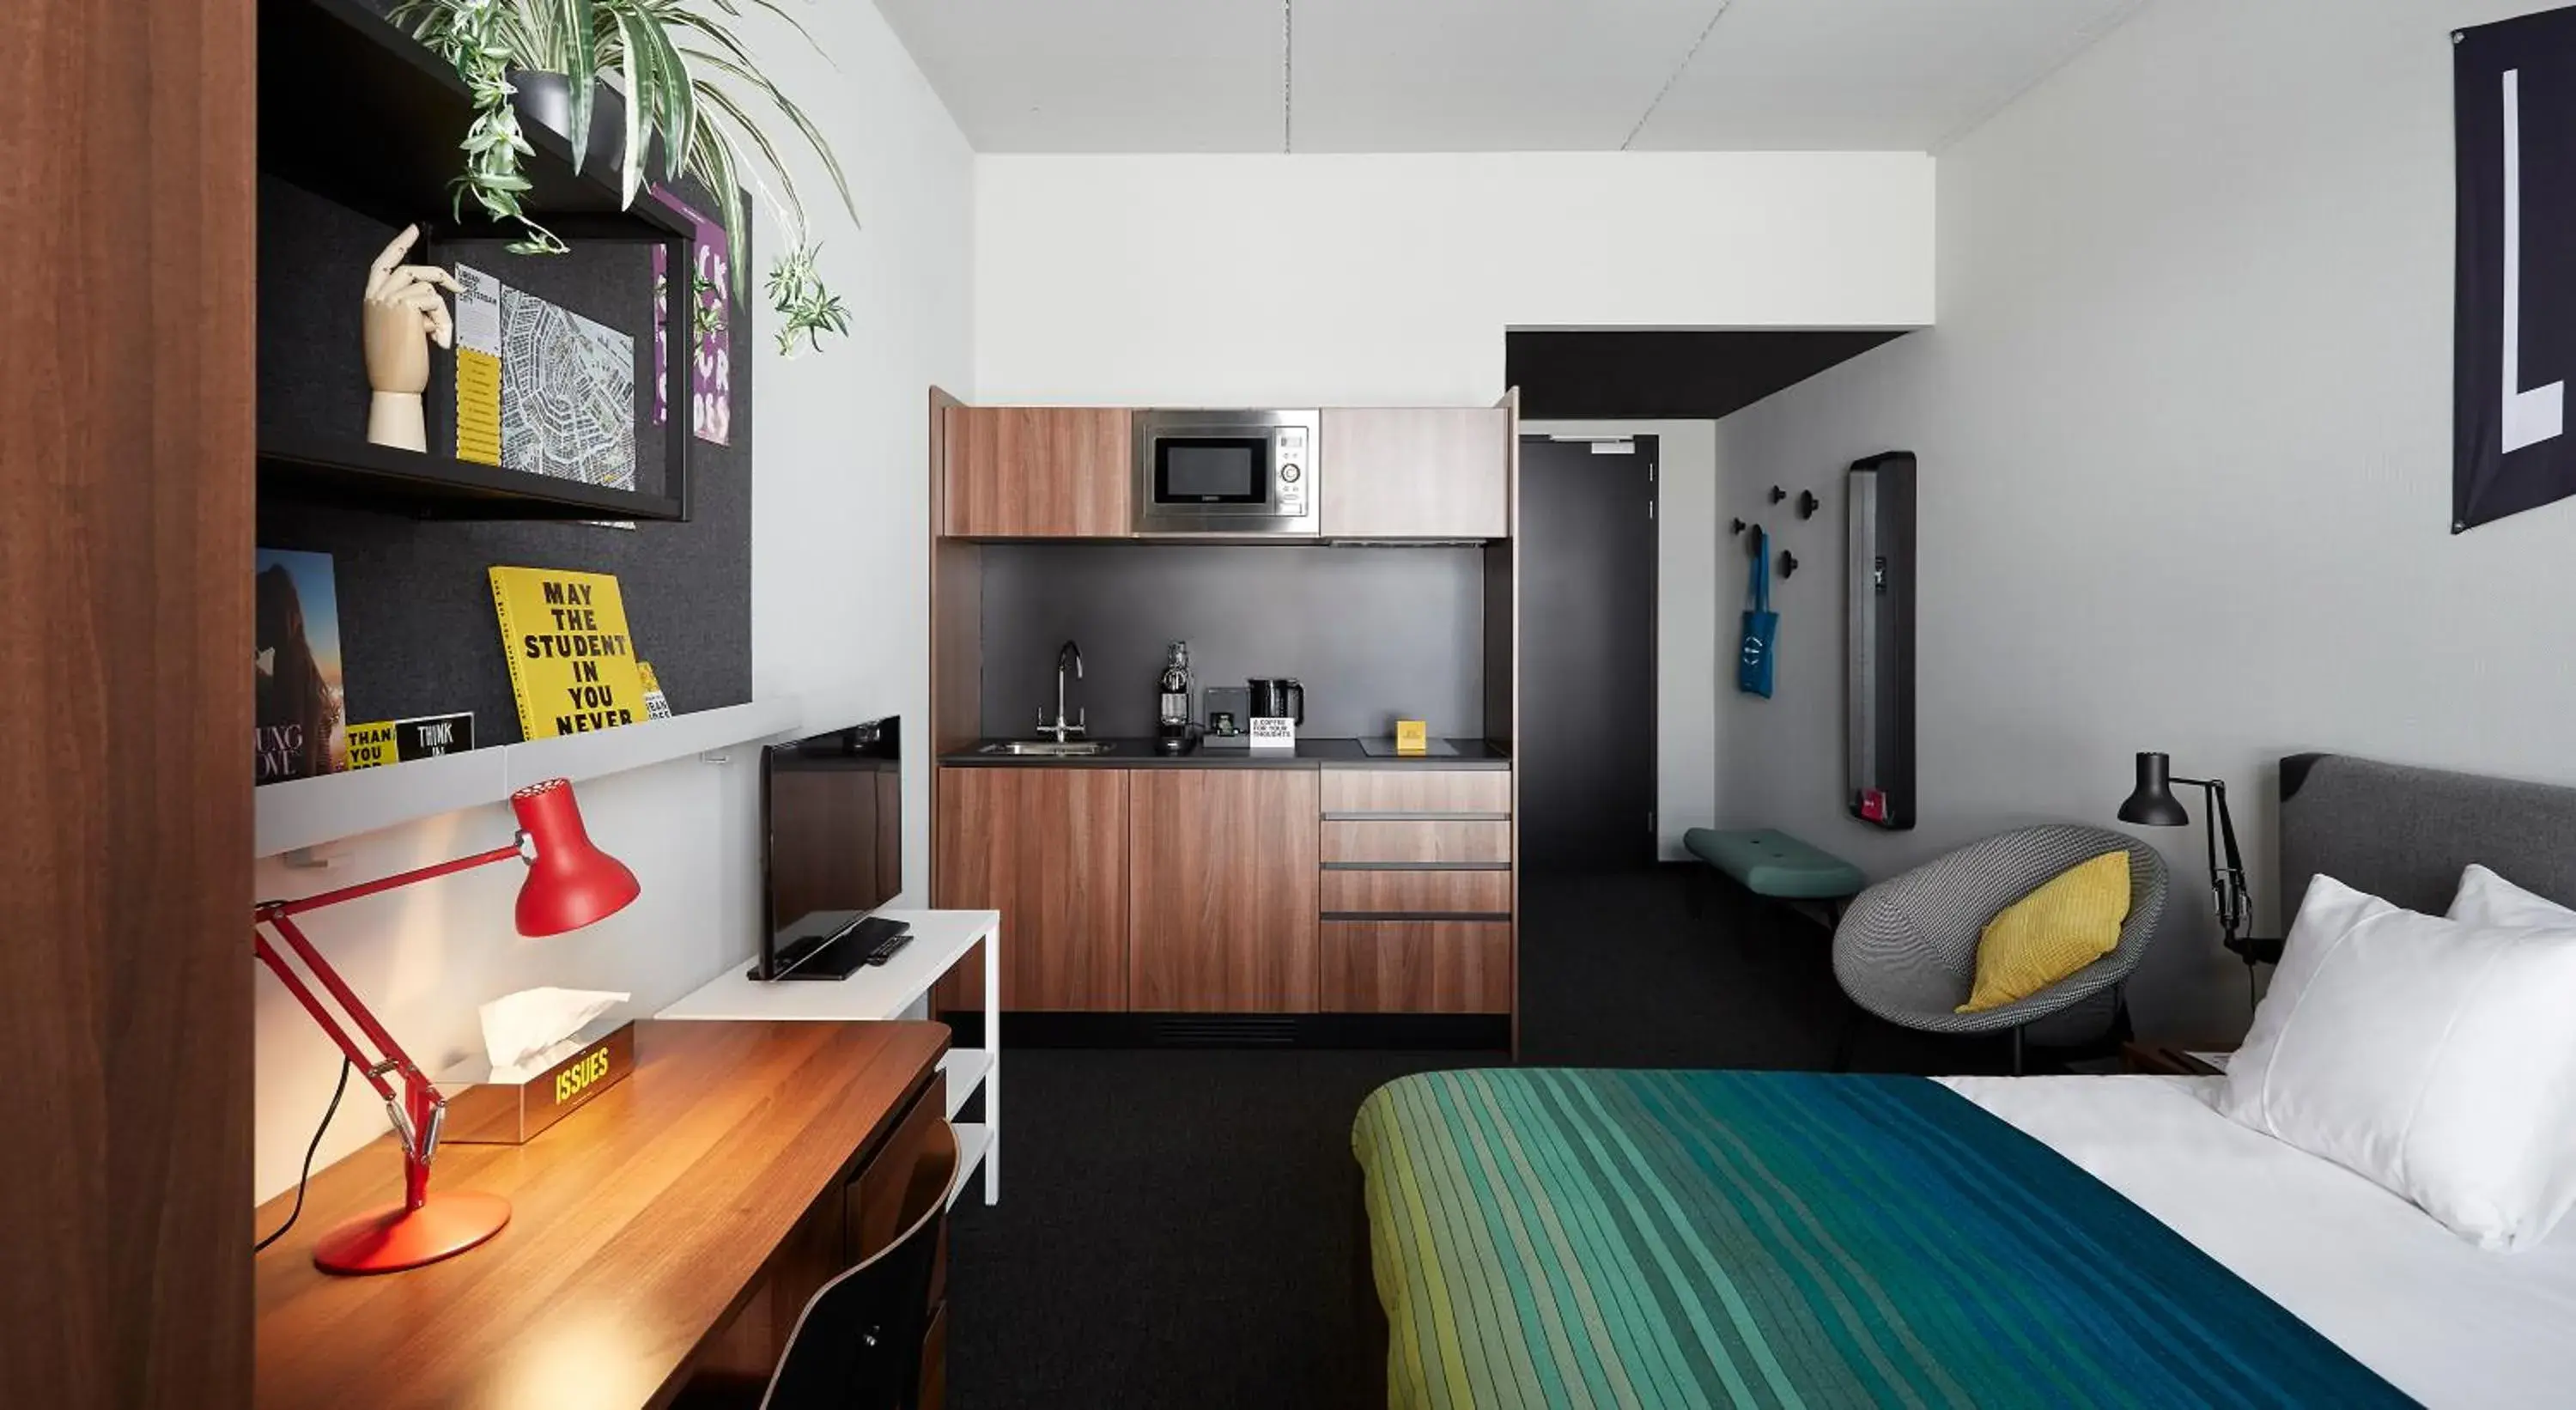 Kitchen or kitchenette, Room Photo in The Social Hub Amsterdam City